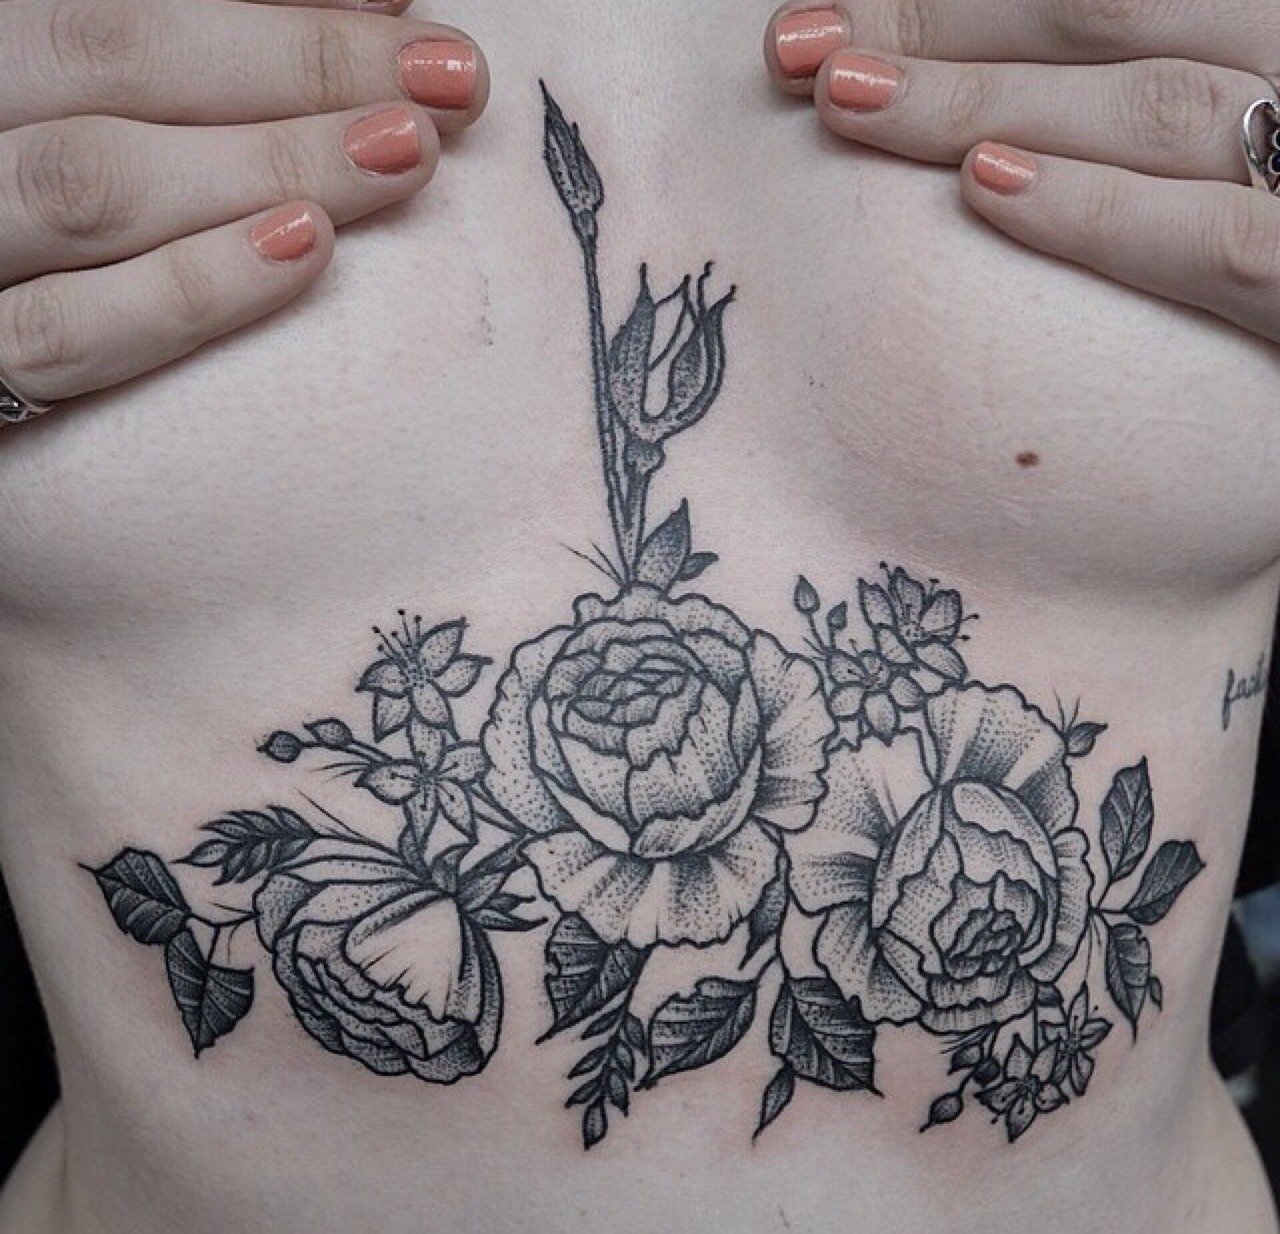 Tattoo uploaded by Nina Lovecrow • Sternum snake and rose tattoo • Tattoodo